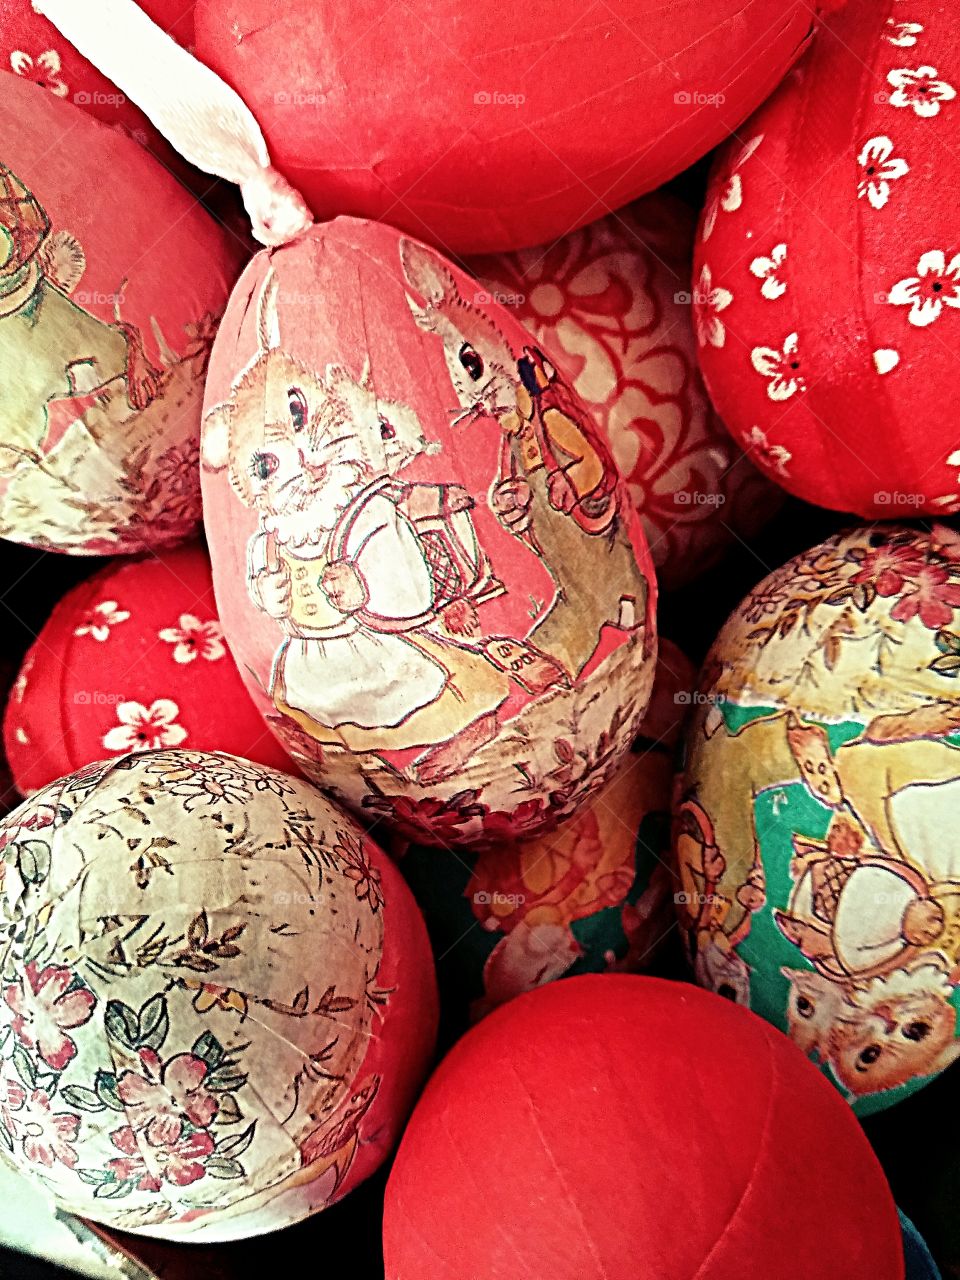 Orthodox Easter is coming